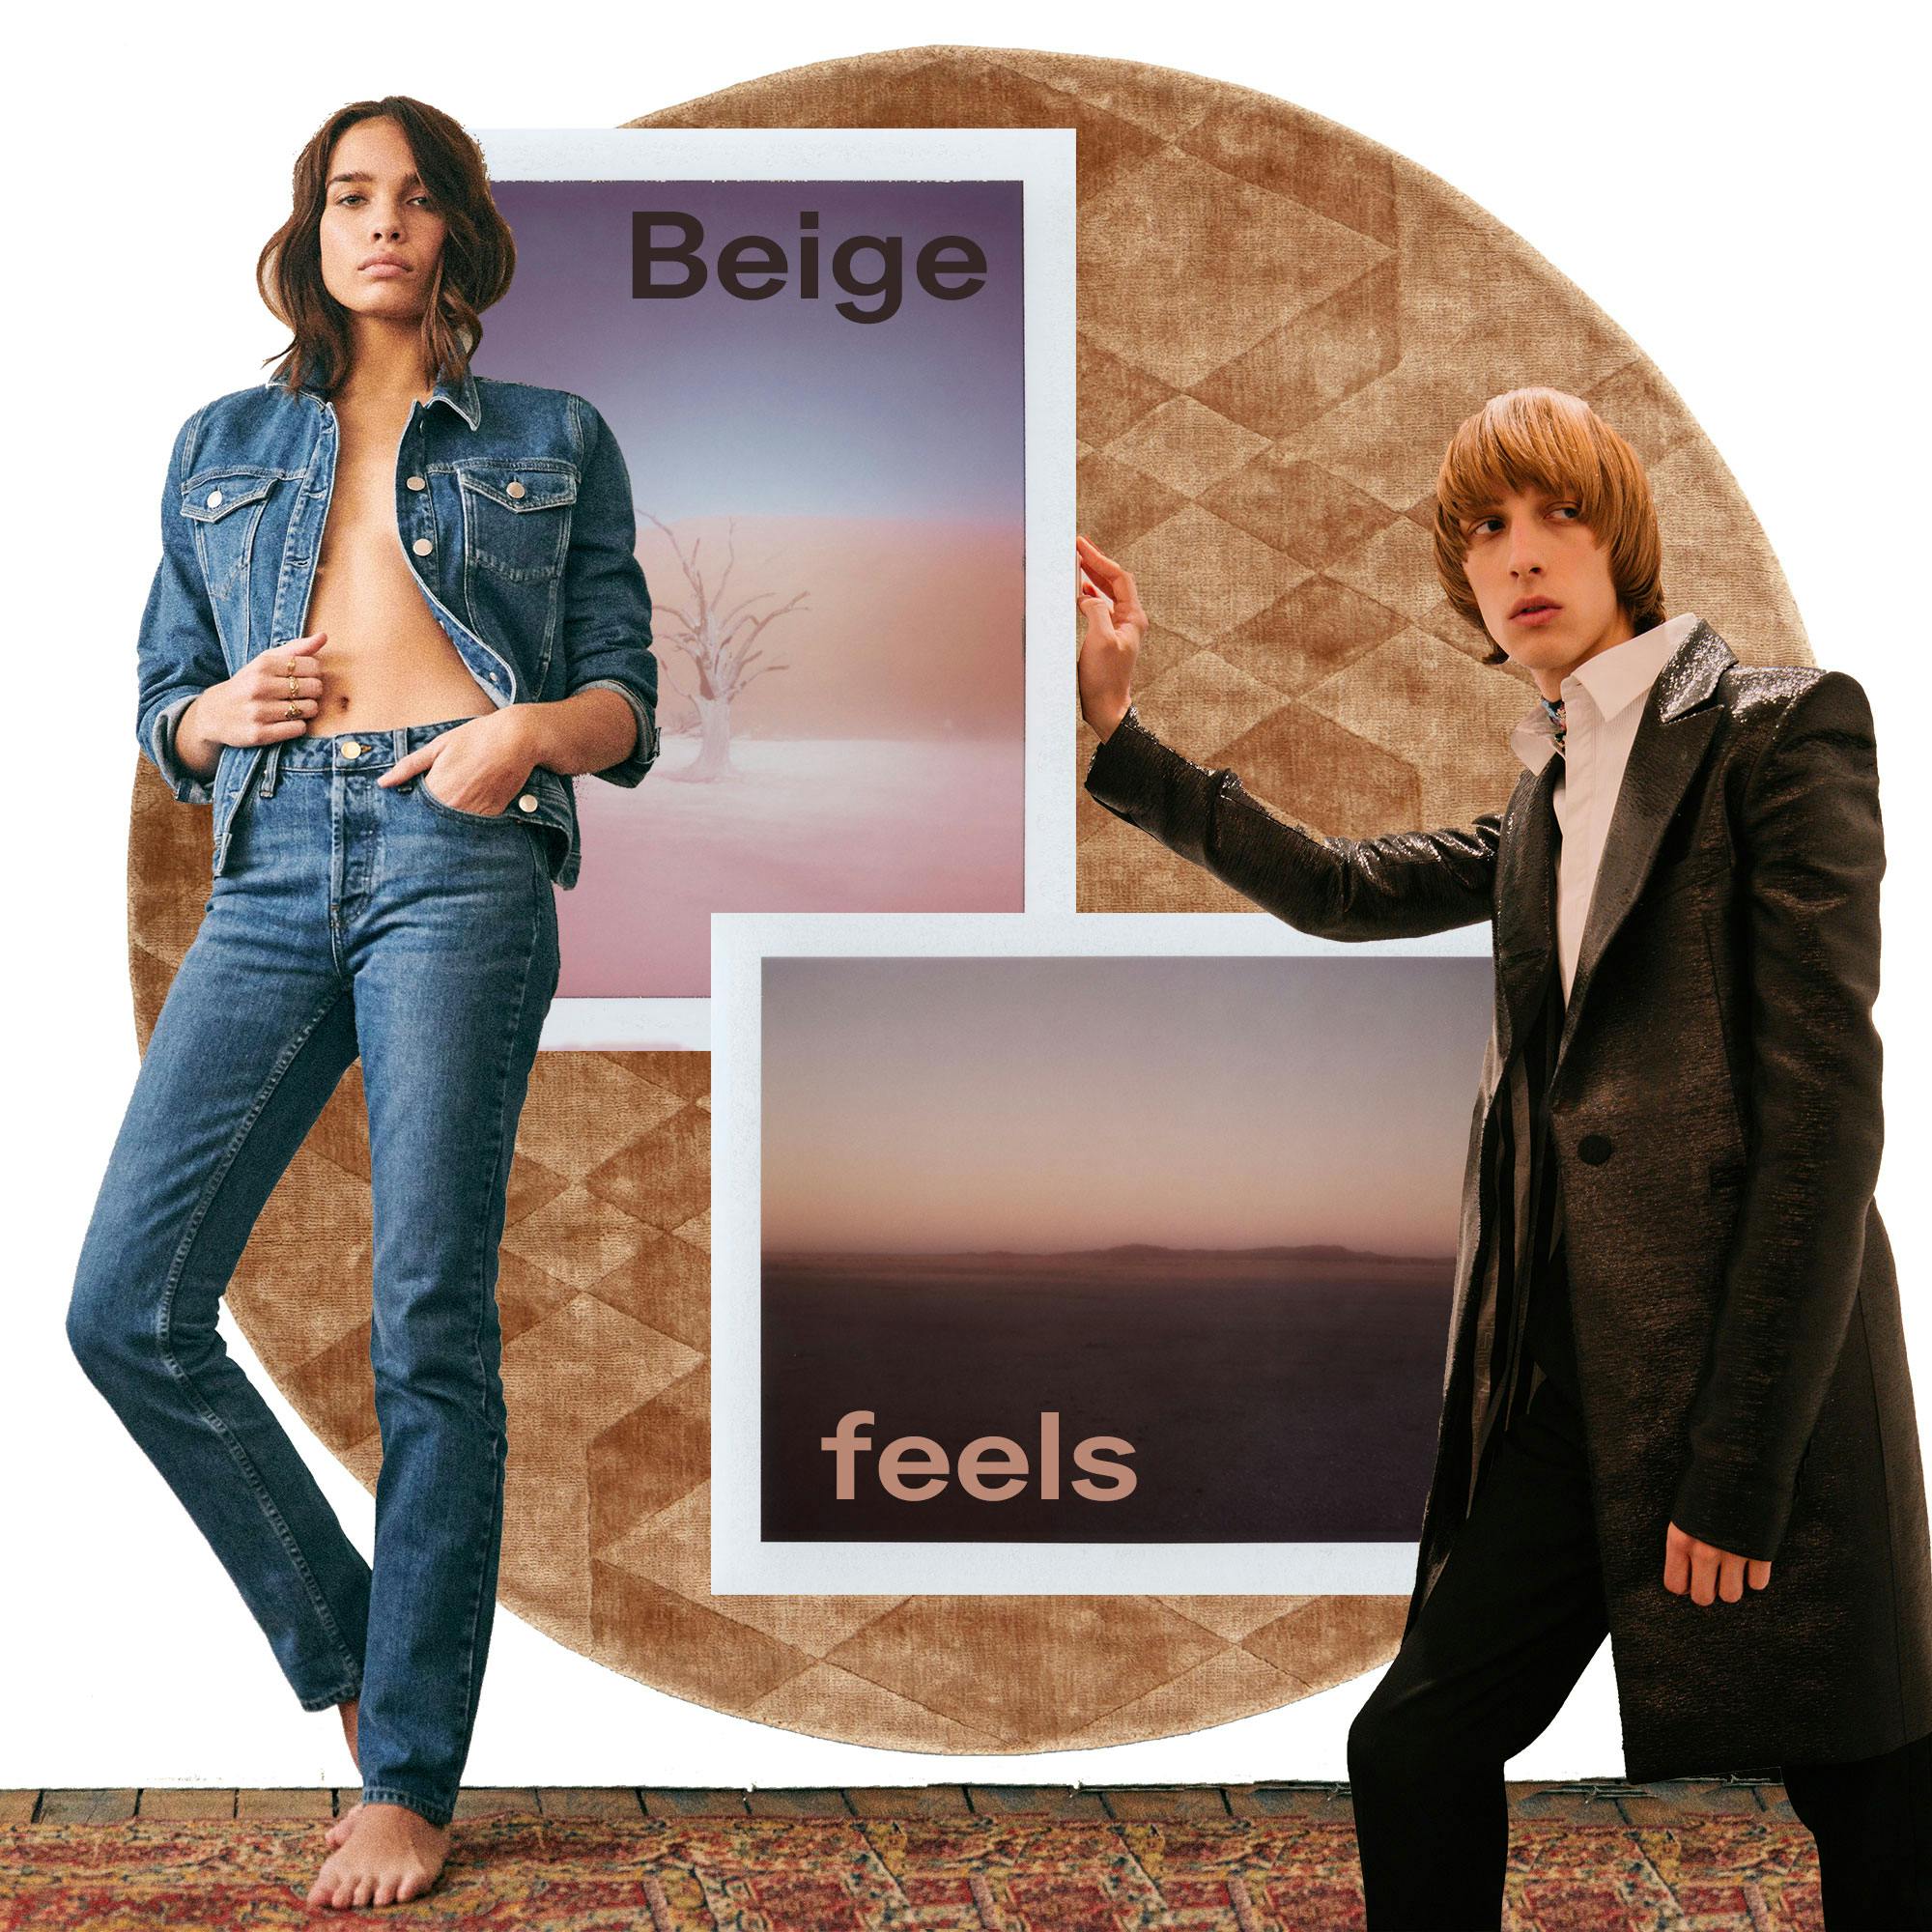 Beige feels: Coming out! 